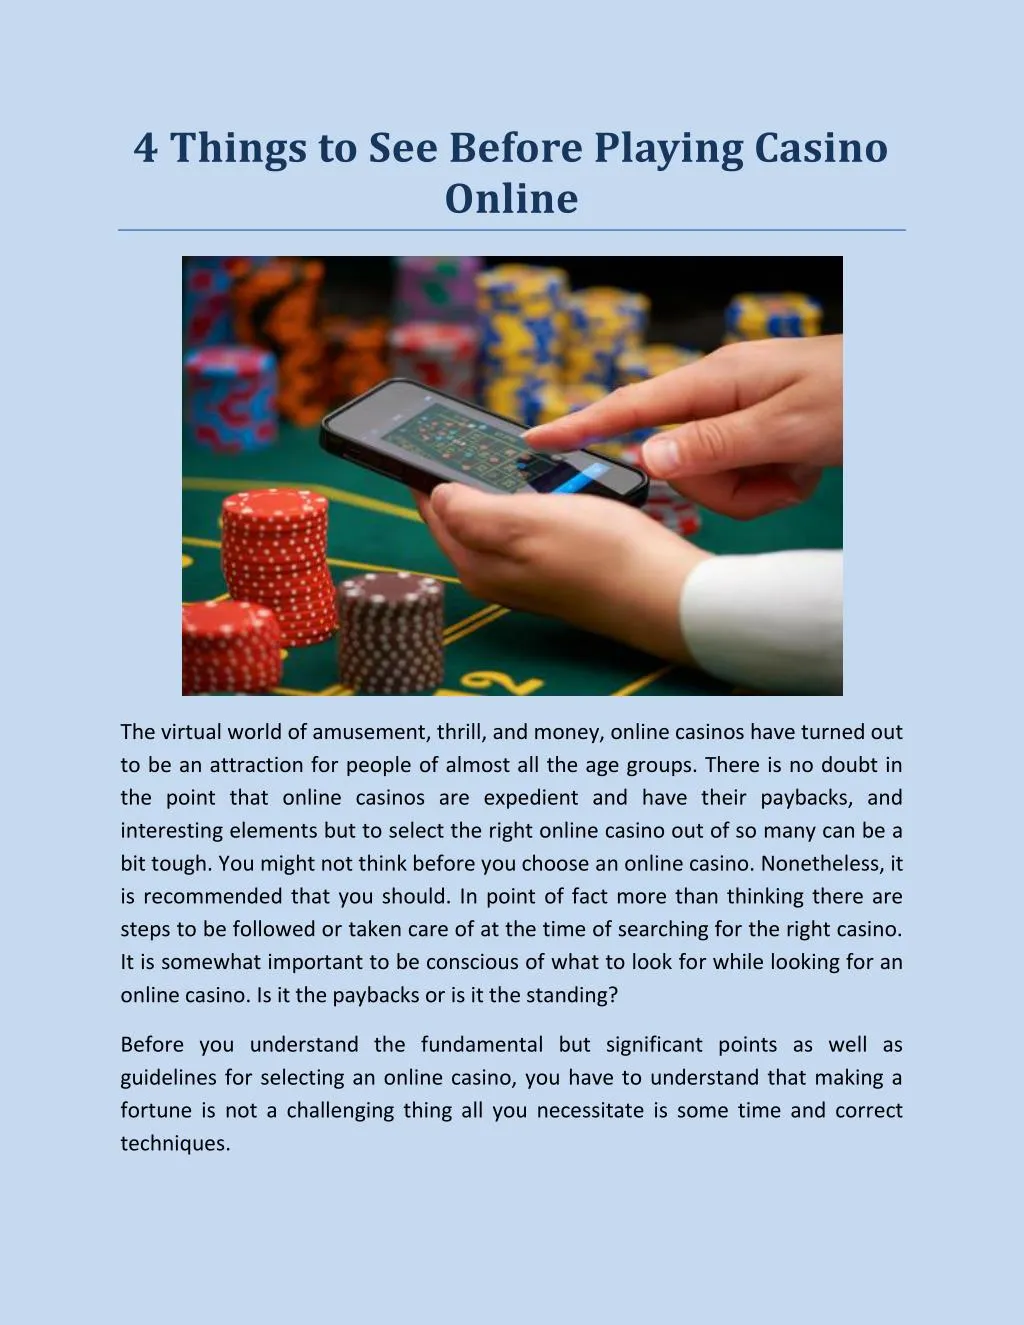 4 things to see before playing casino online